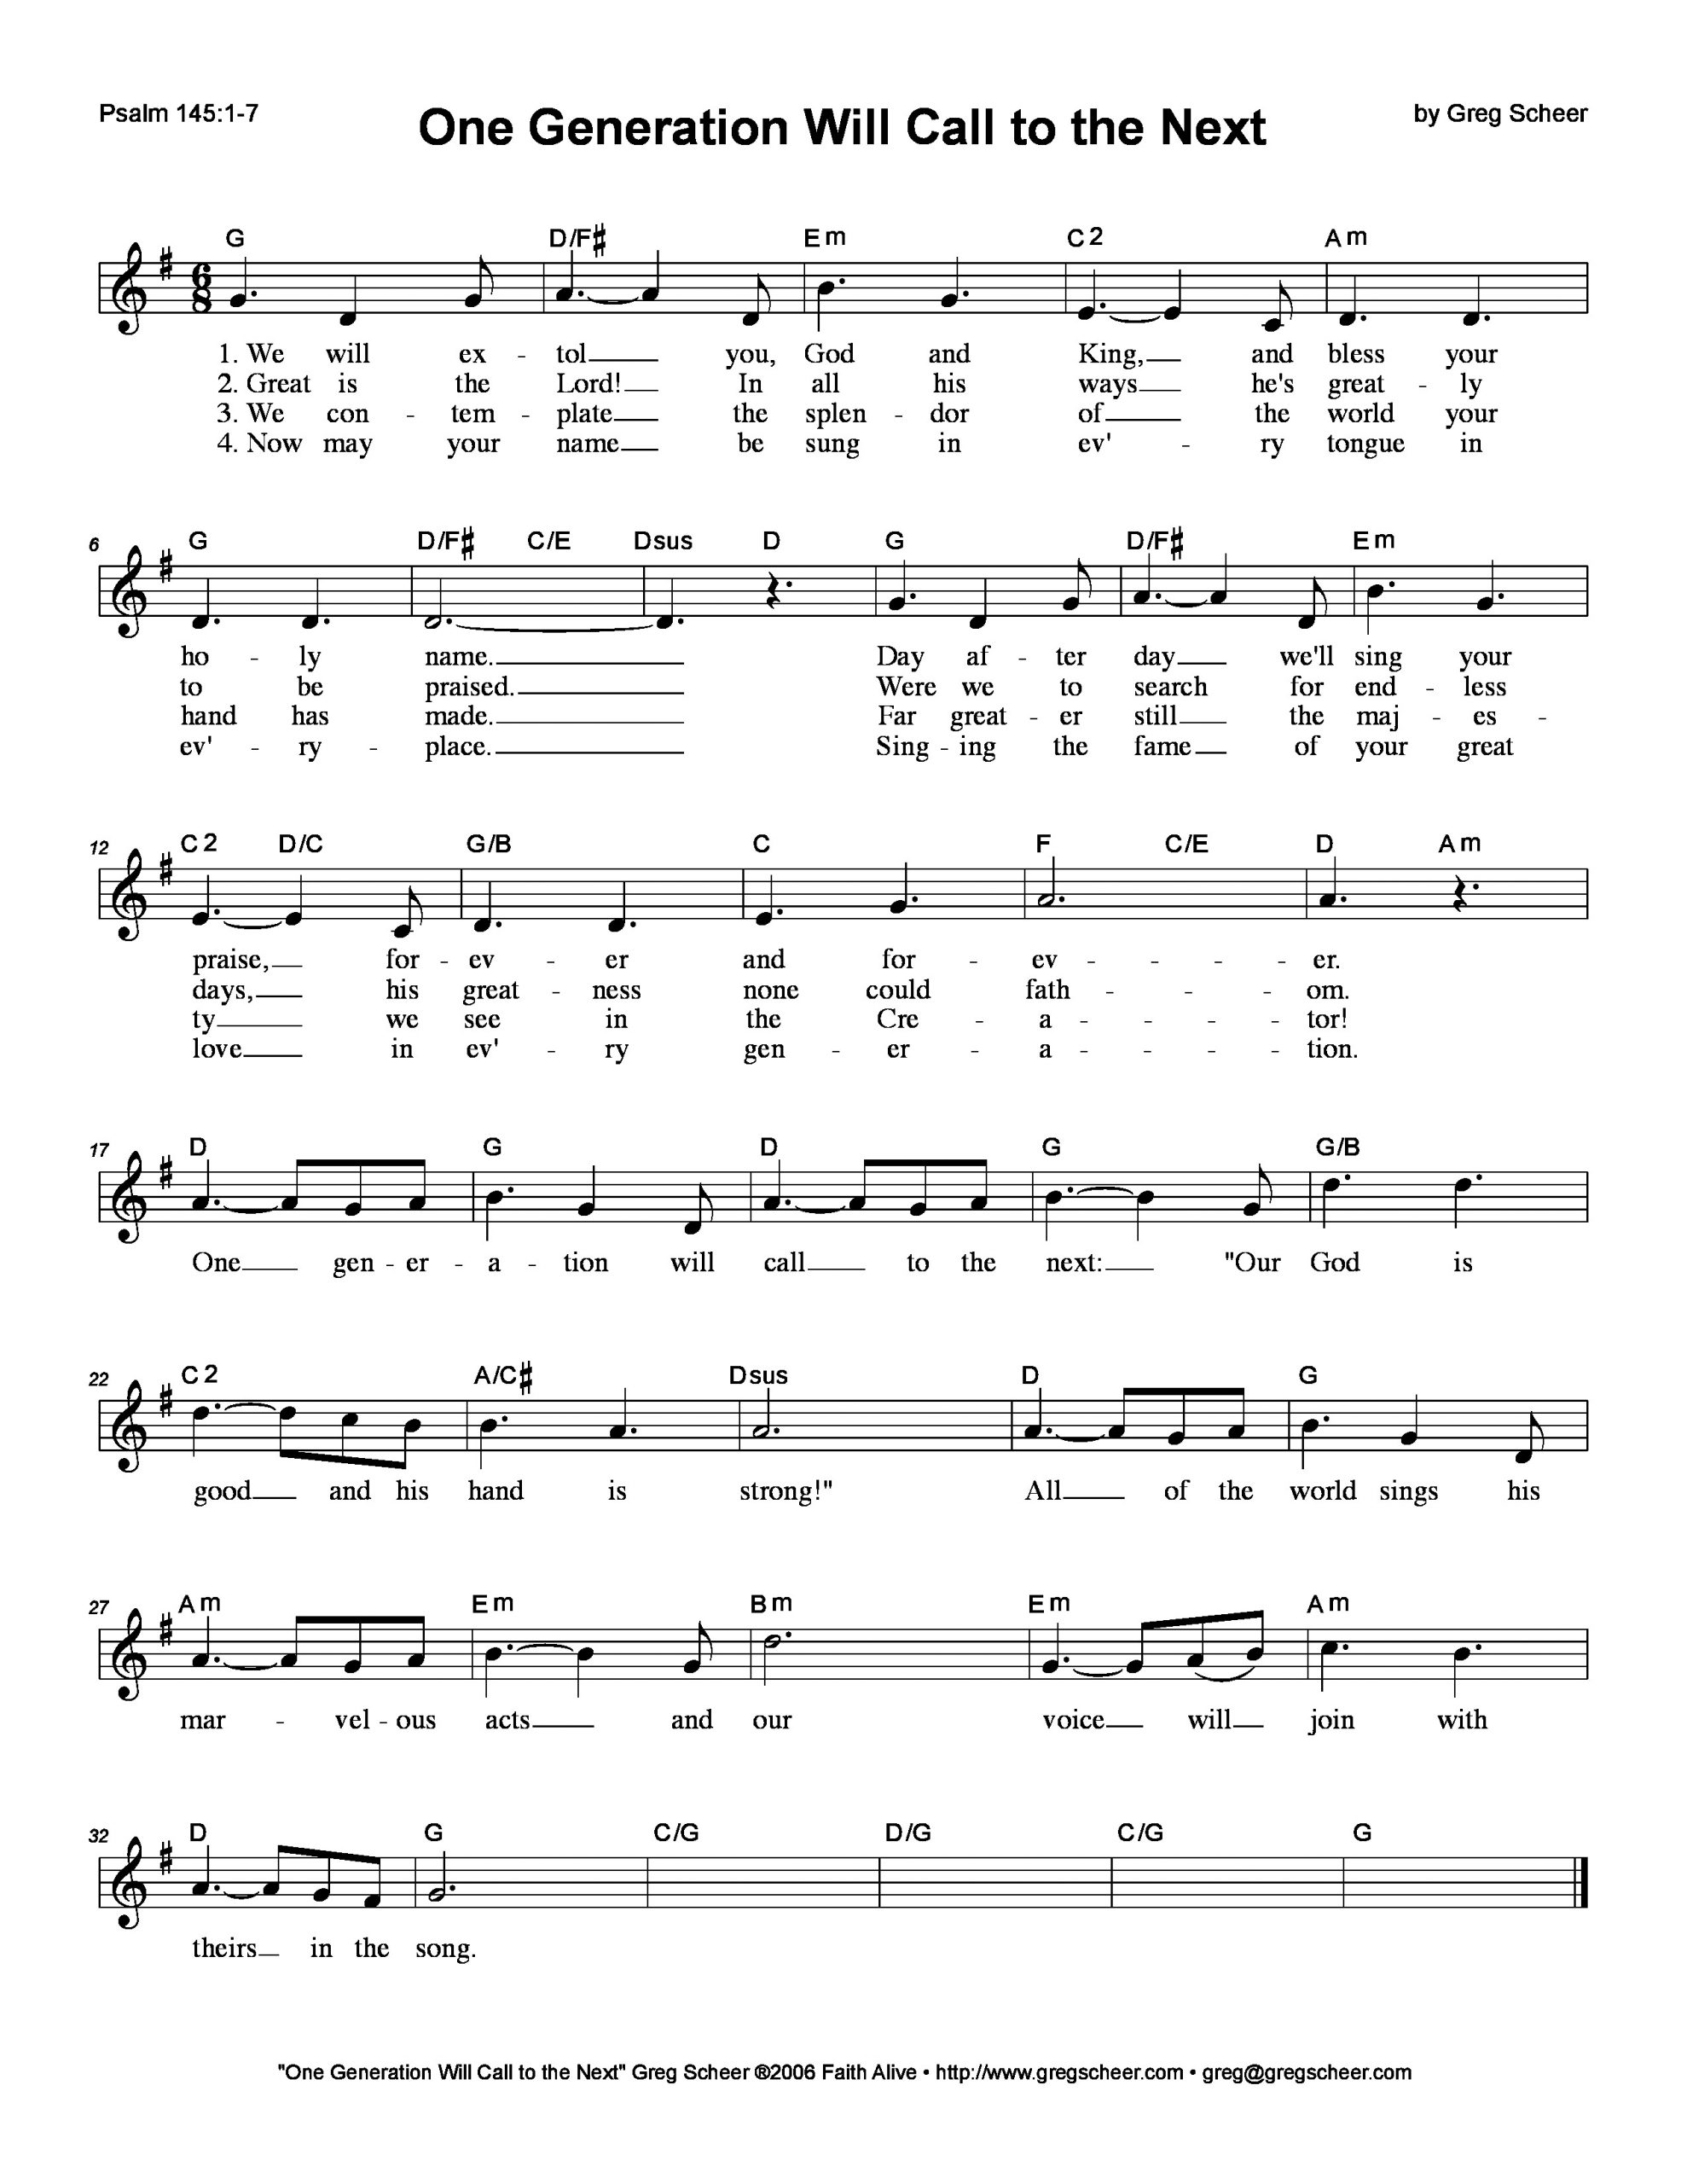 Bully, Bully - Words, Piano Score and MP3. Free Download